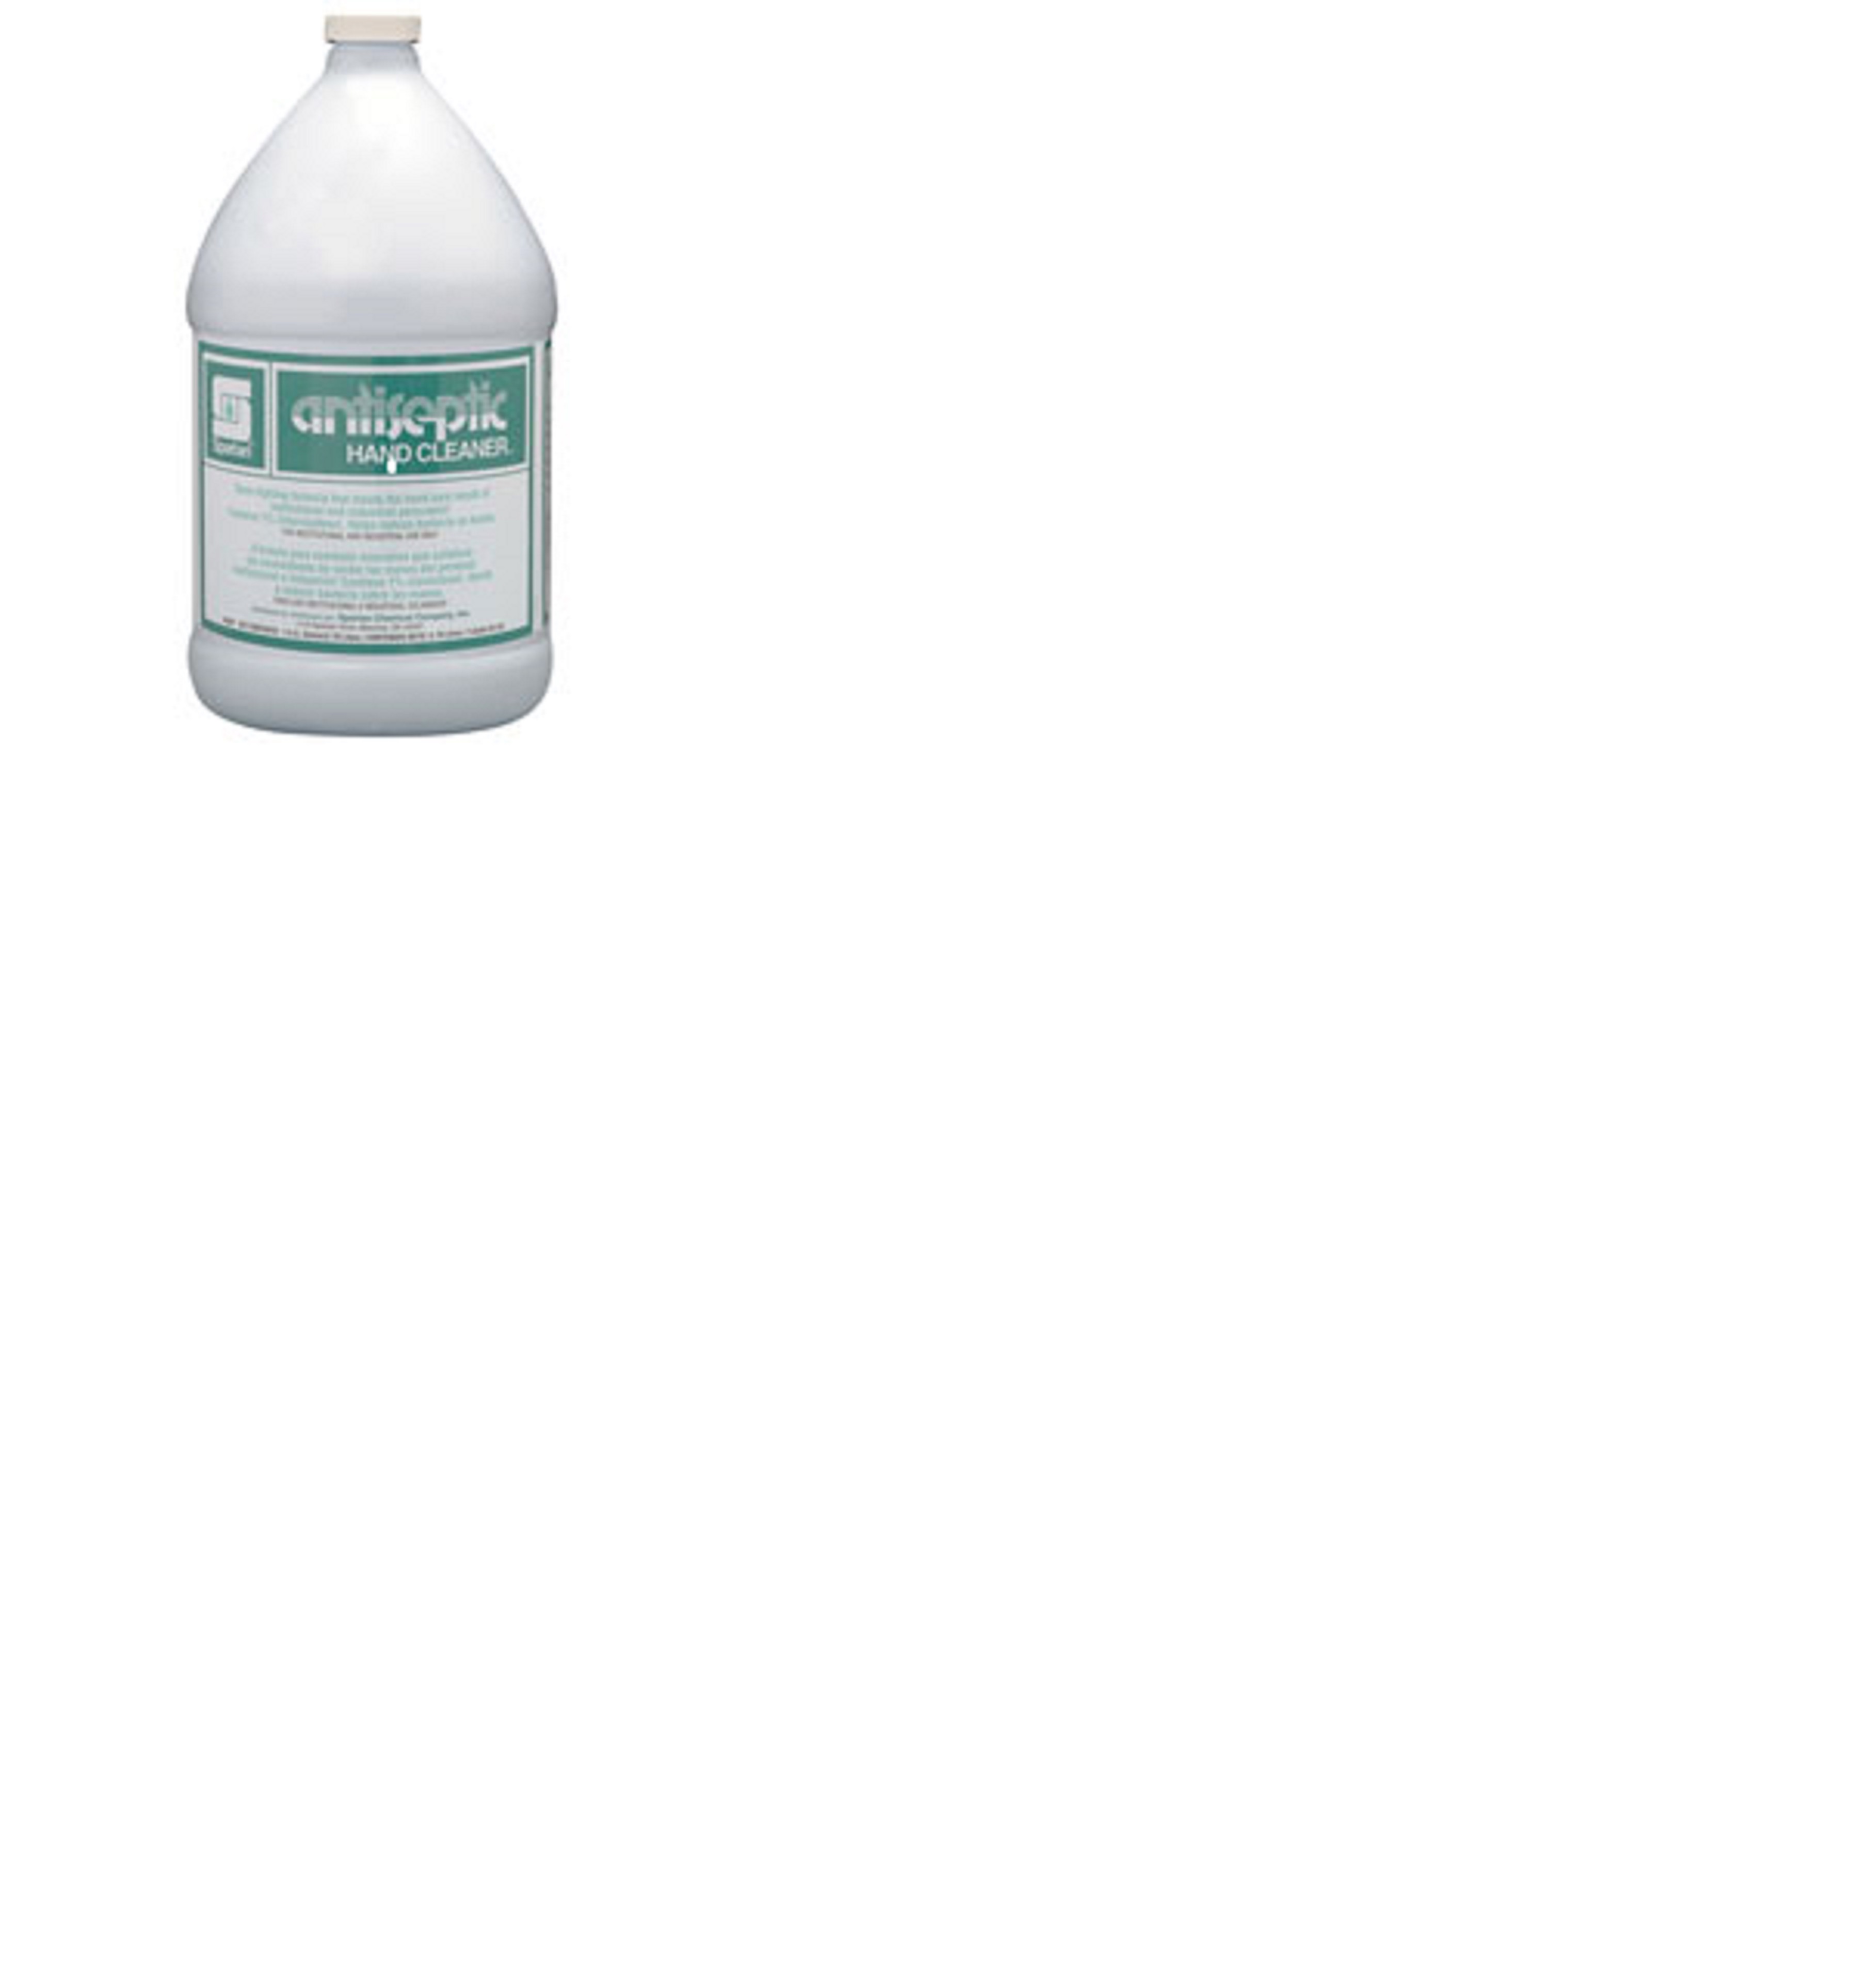 304301 ANTISEPTIC HAND CLEANER
4/1 GAL/CASE
REPLACES JANTI1 - #3007